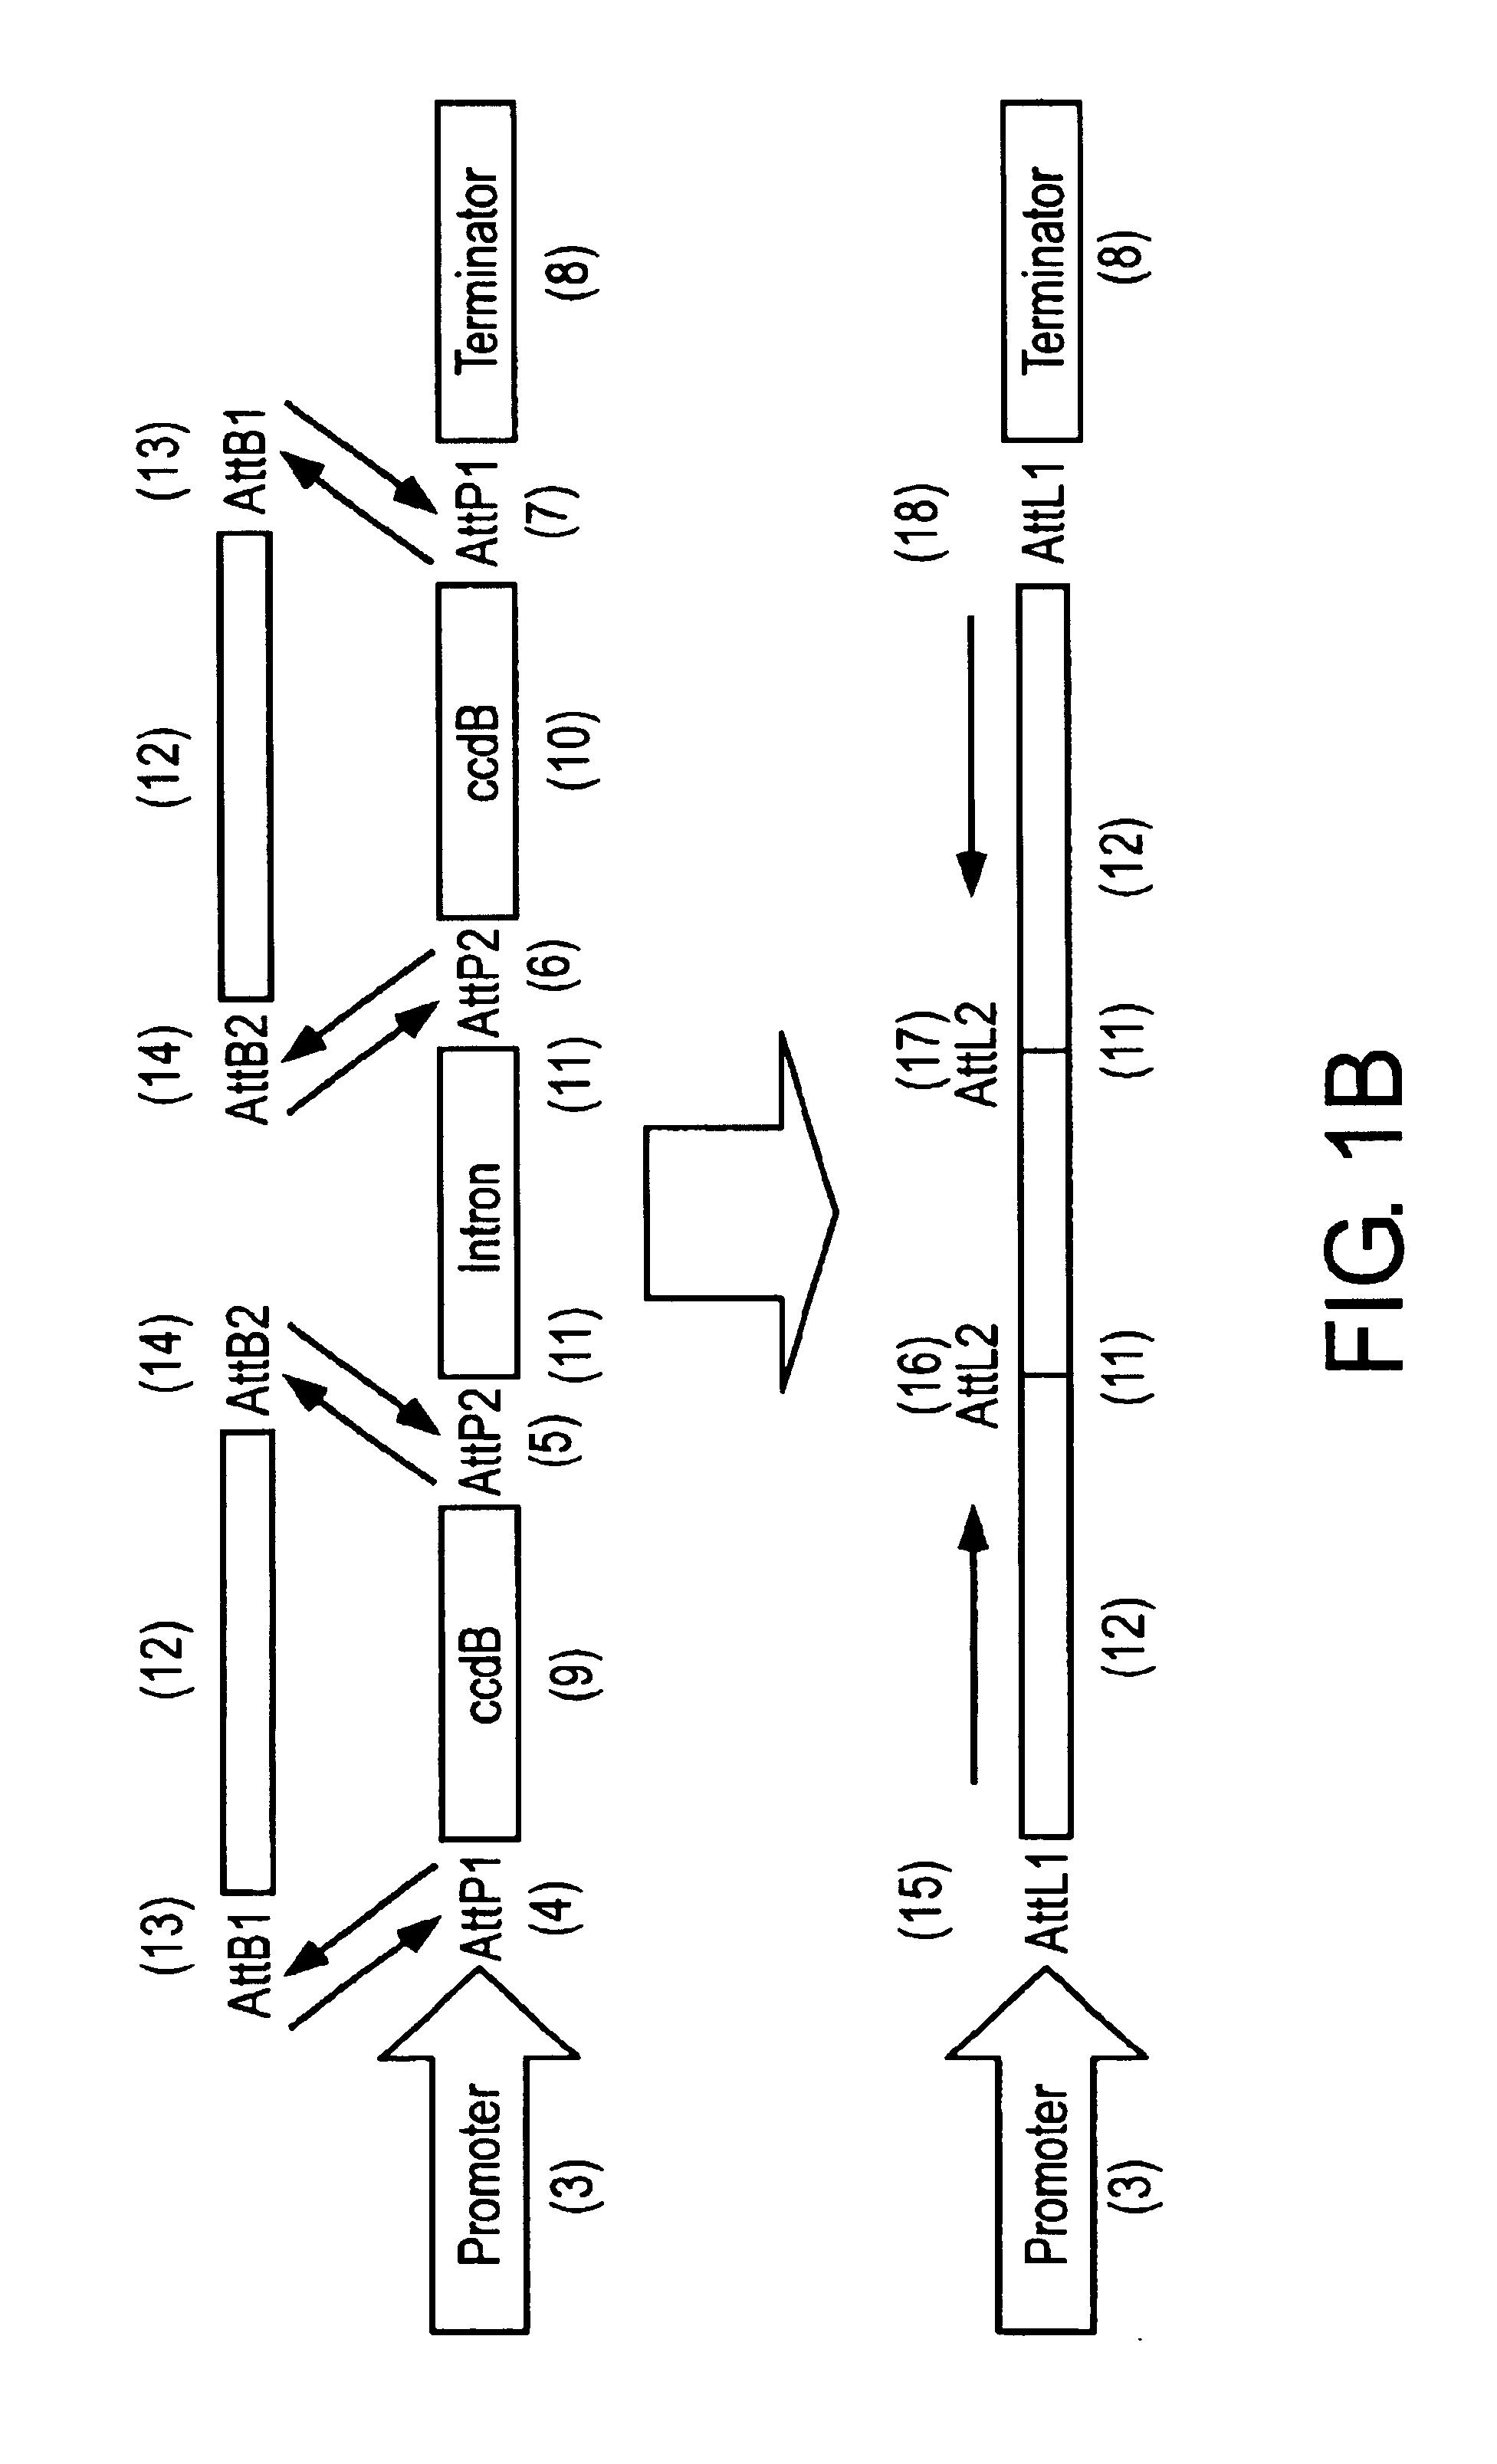 Methods and means for producing efficient silencing construct using recombinational cloning